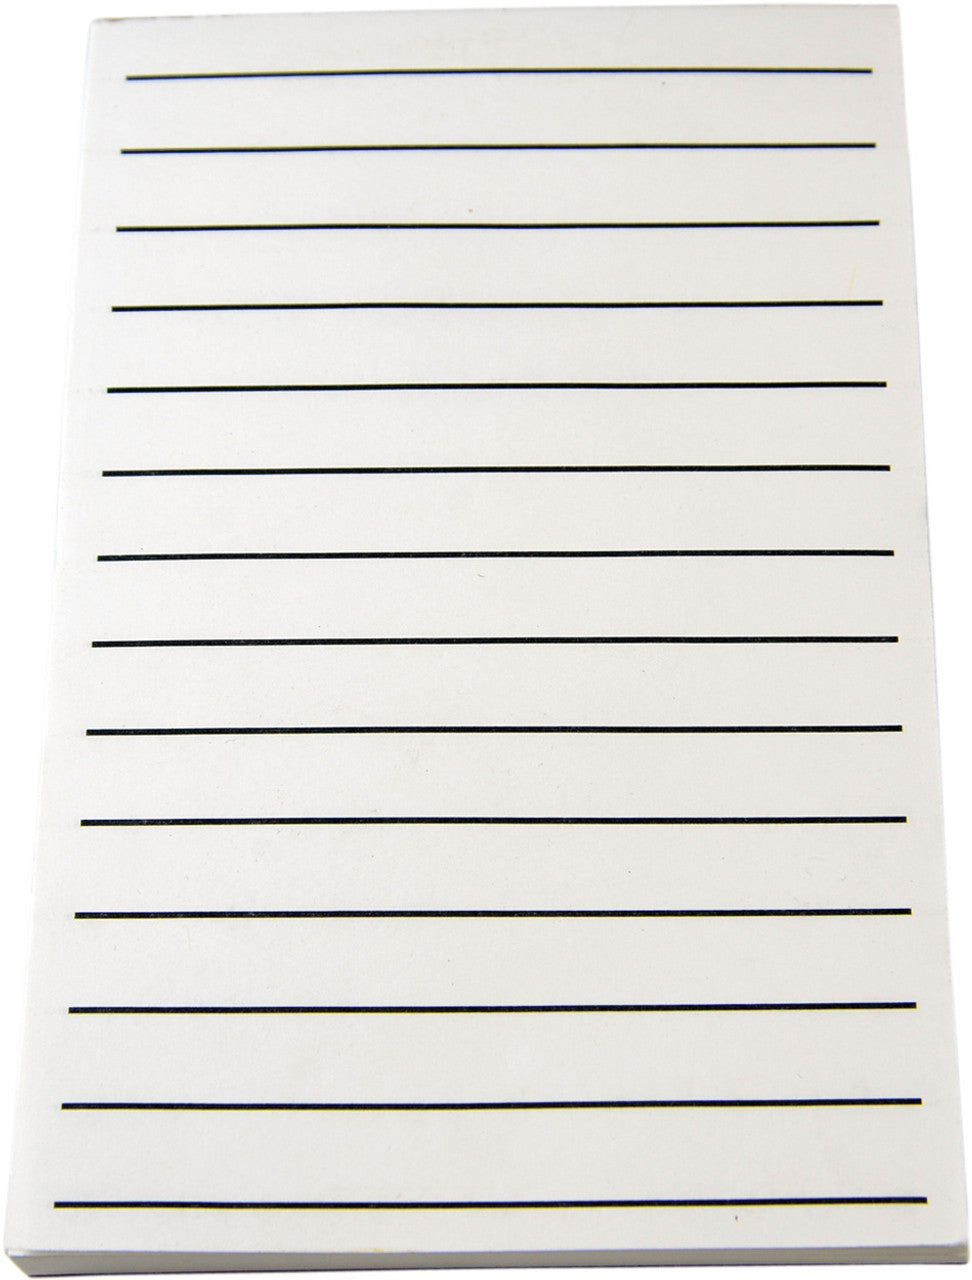 Bold line note pad measures 5.5 x 8.5 inches with 14 lines that are .56 (9/16) inches apart. 100 sheets per gummed pad